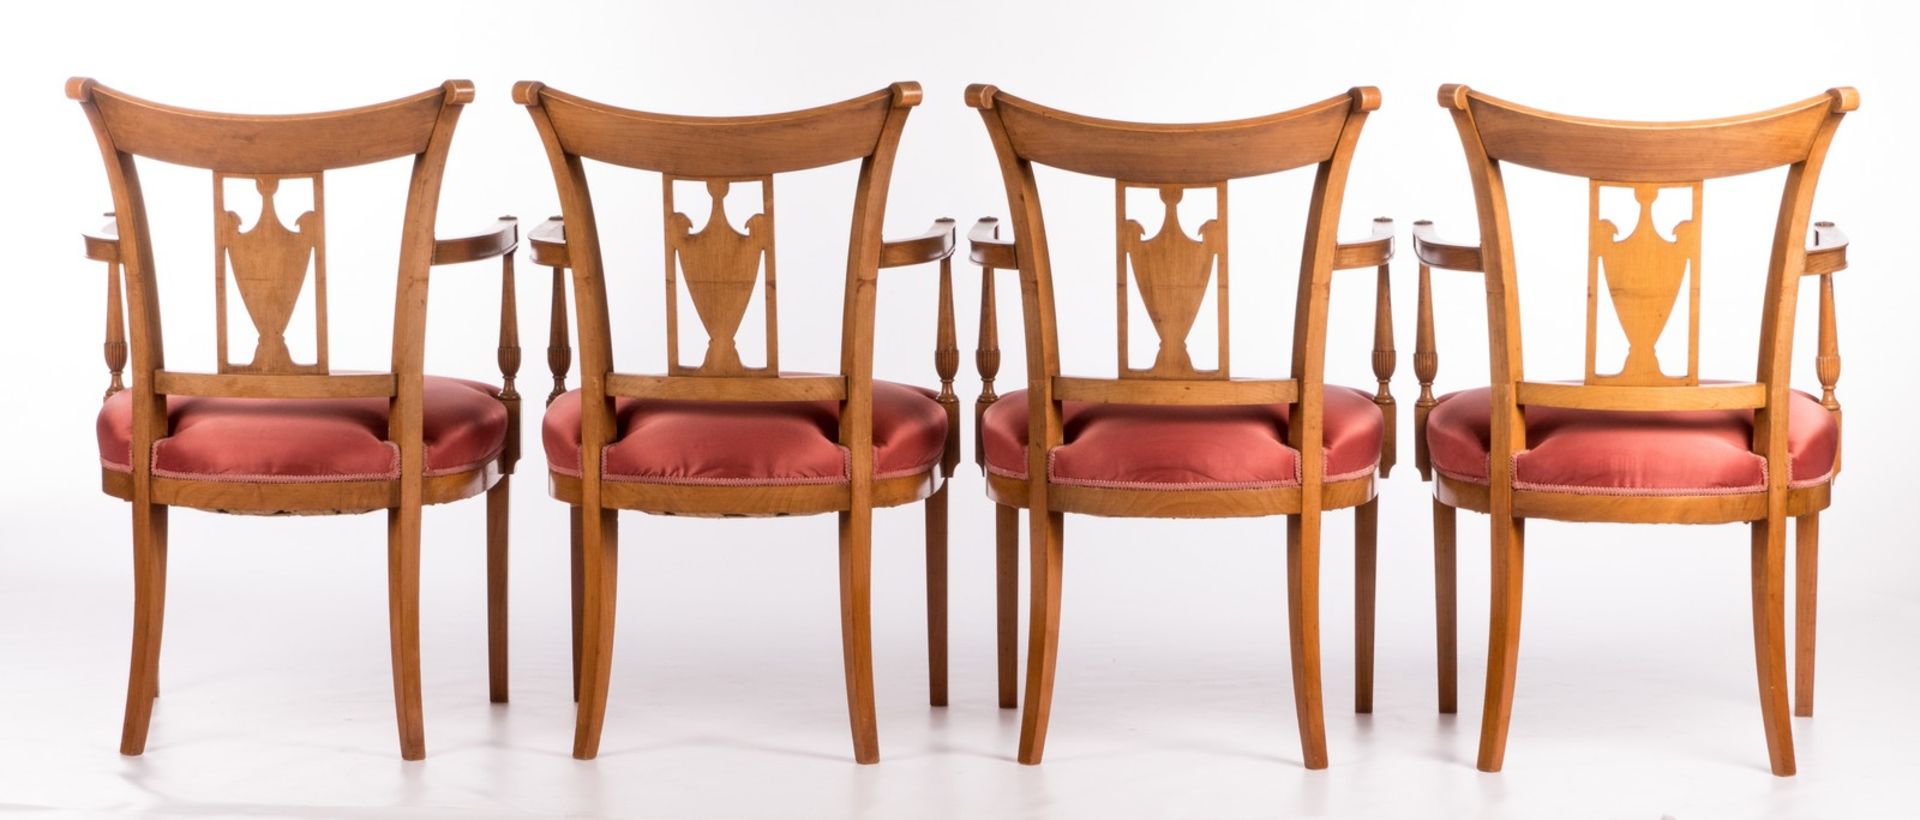 Aa set of four French directoire style cherrywood armchairs, H 88,5 - W 56 - D 59,5 cm - Bild 3 aus 8